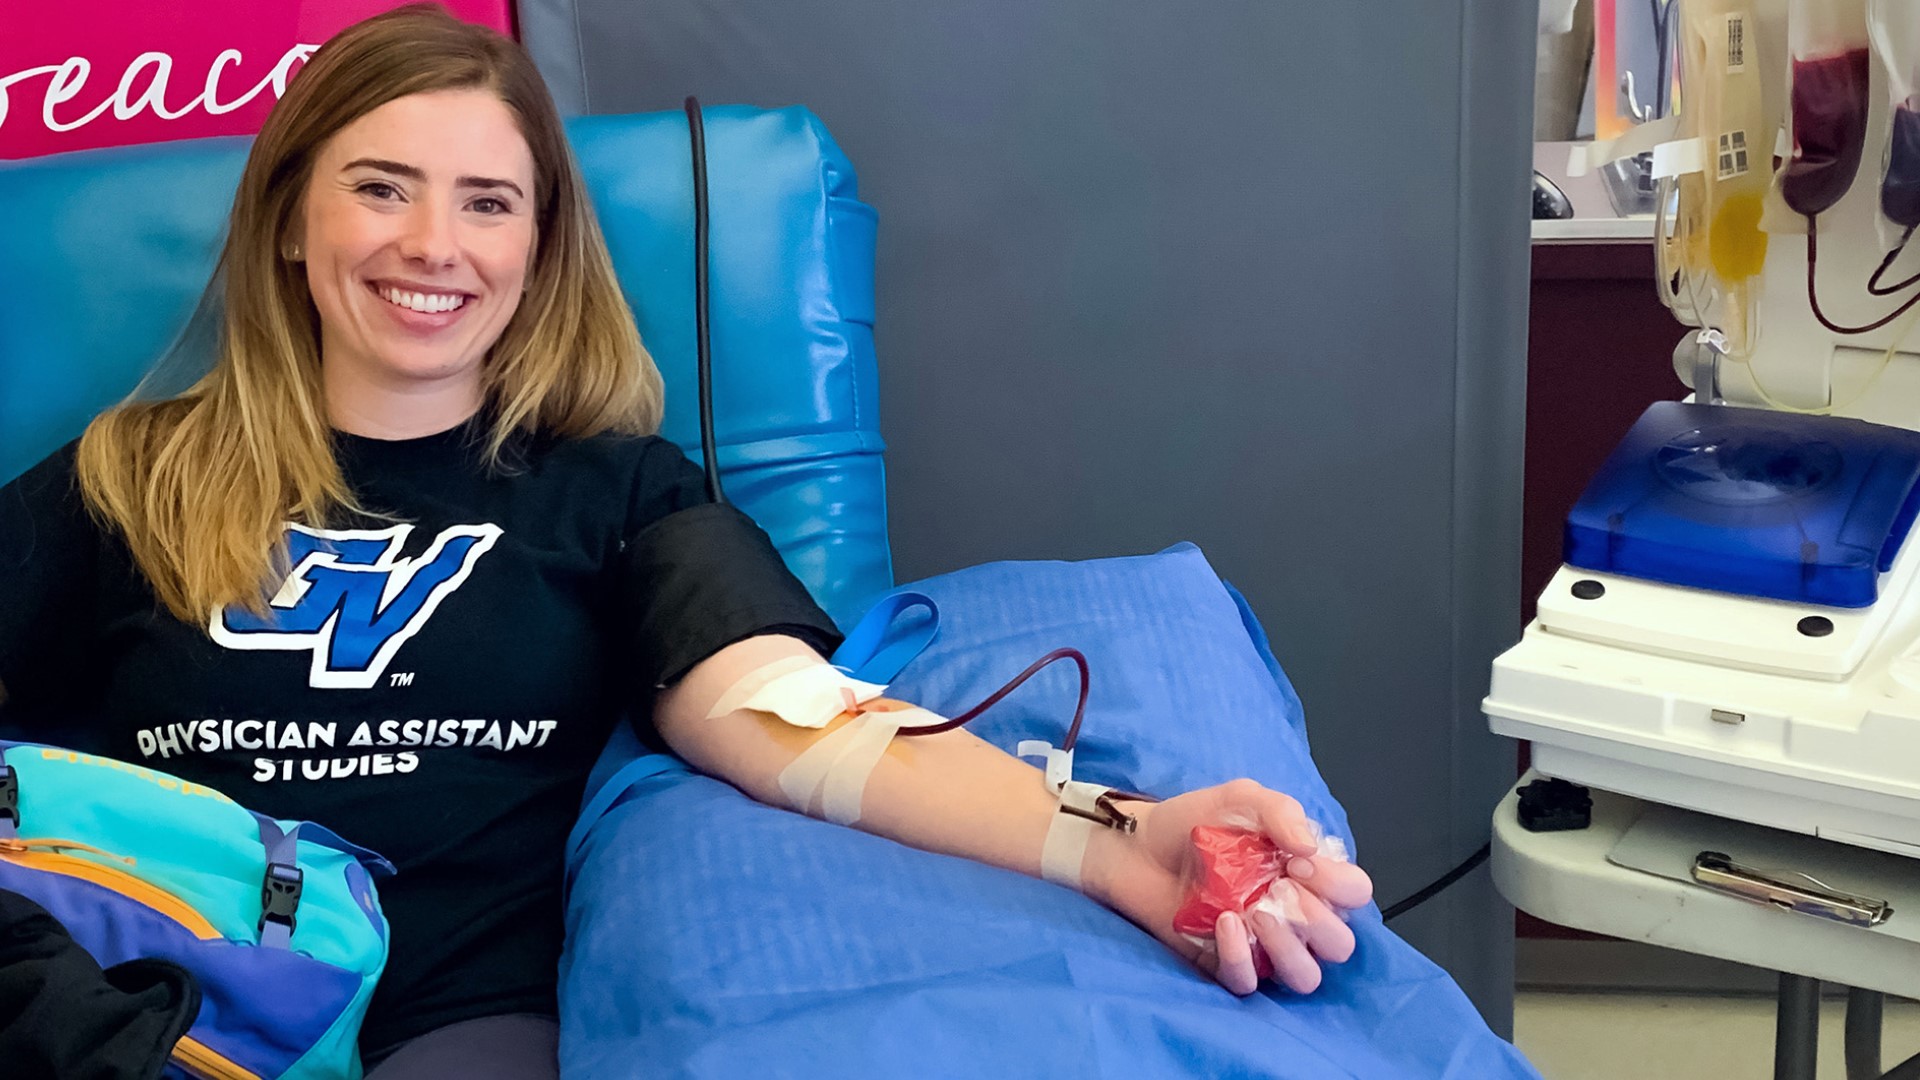 A Grand Valley State University graduate student has recovered from COVID-19, and now she is donating her plasma in order to help others survive the disease.